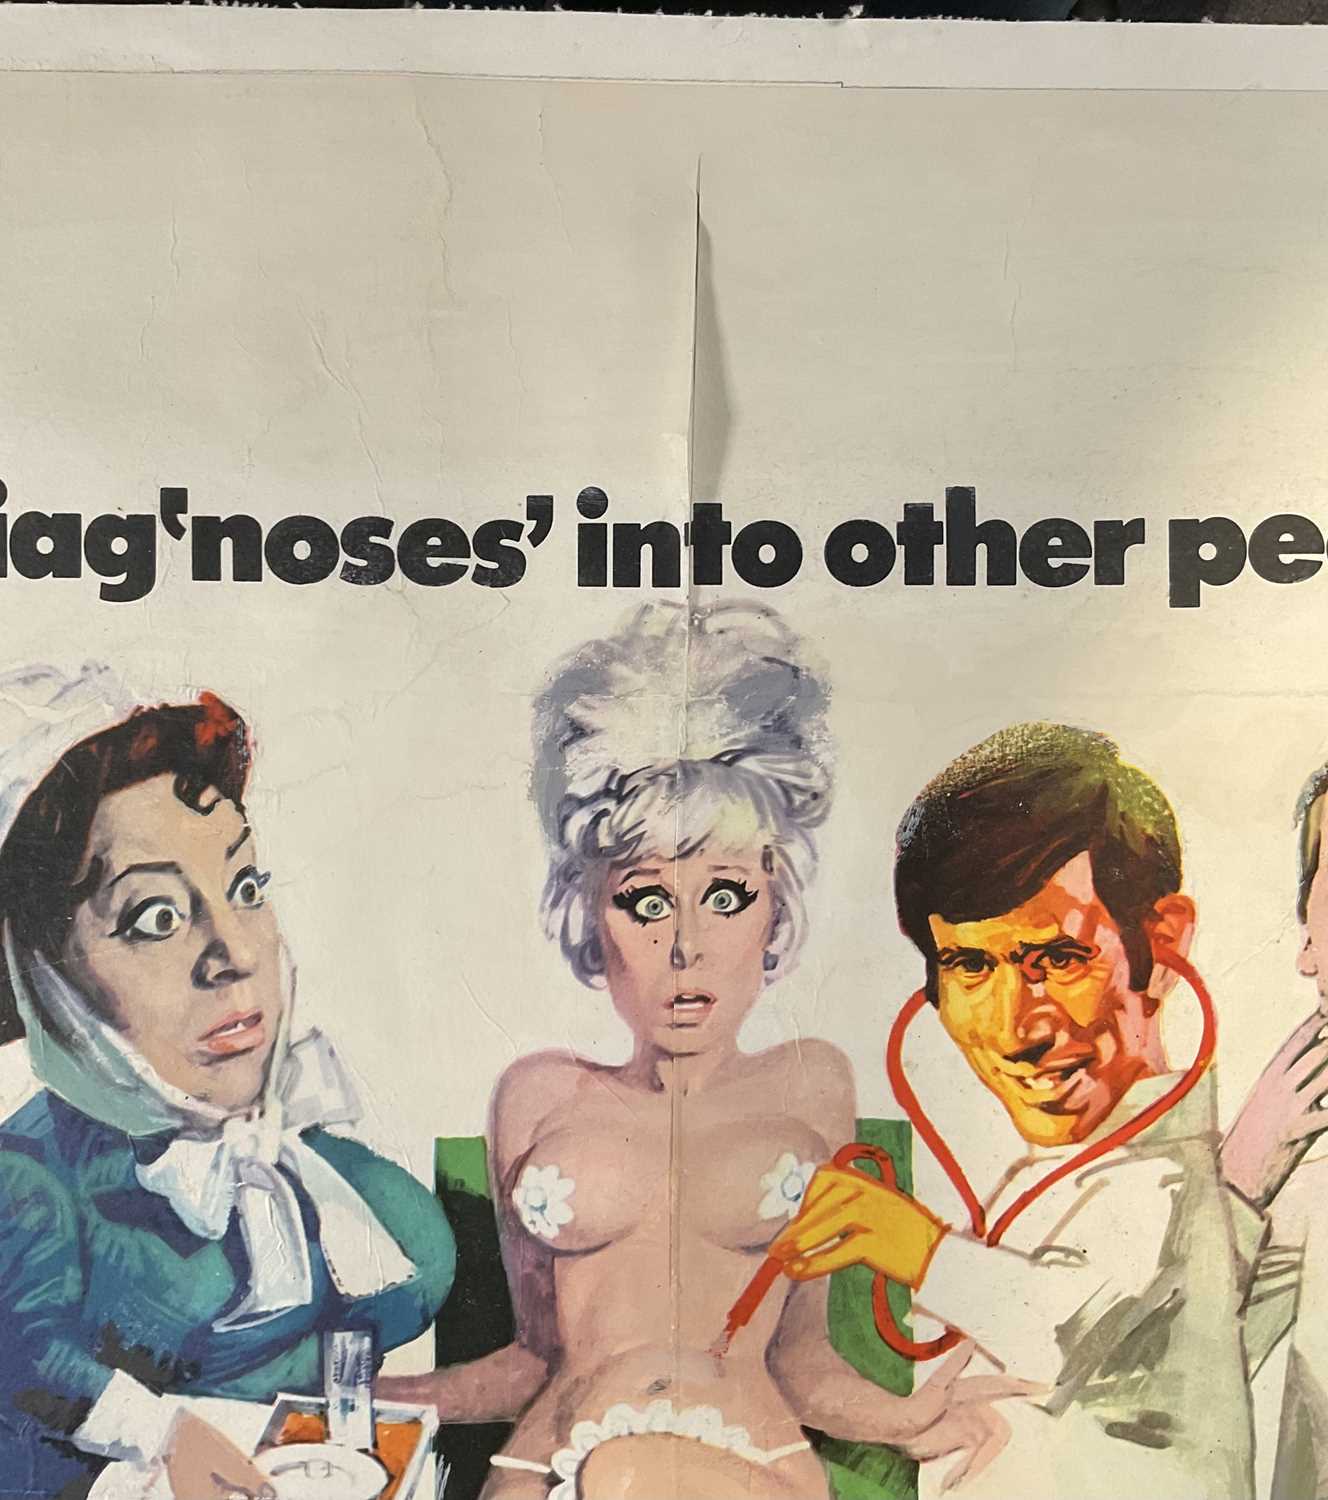 CARRY ON AGAIN DOCTOR (1969) Linen backed and restored UK Quad film poster, Peter Rogers classic - Image 4 of 6